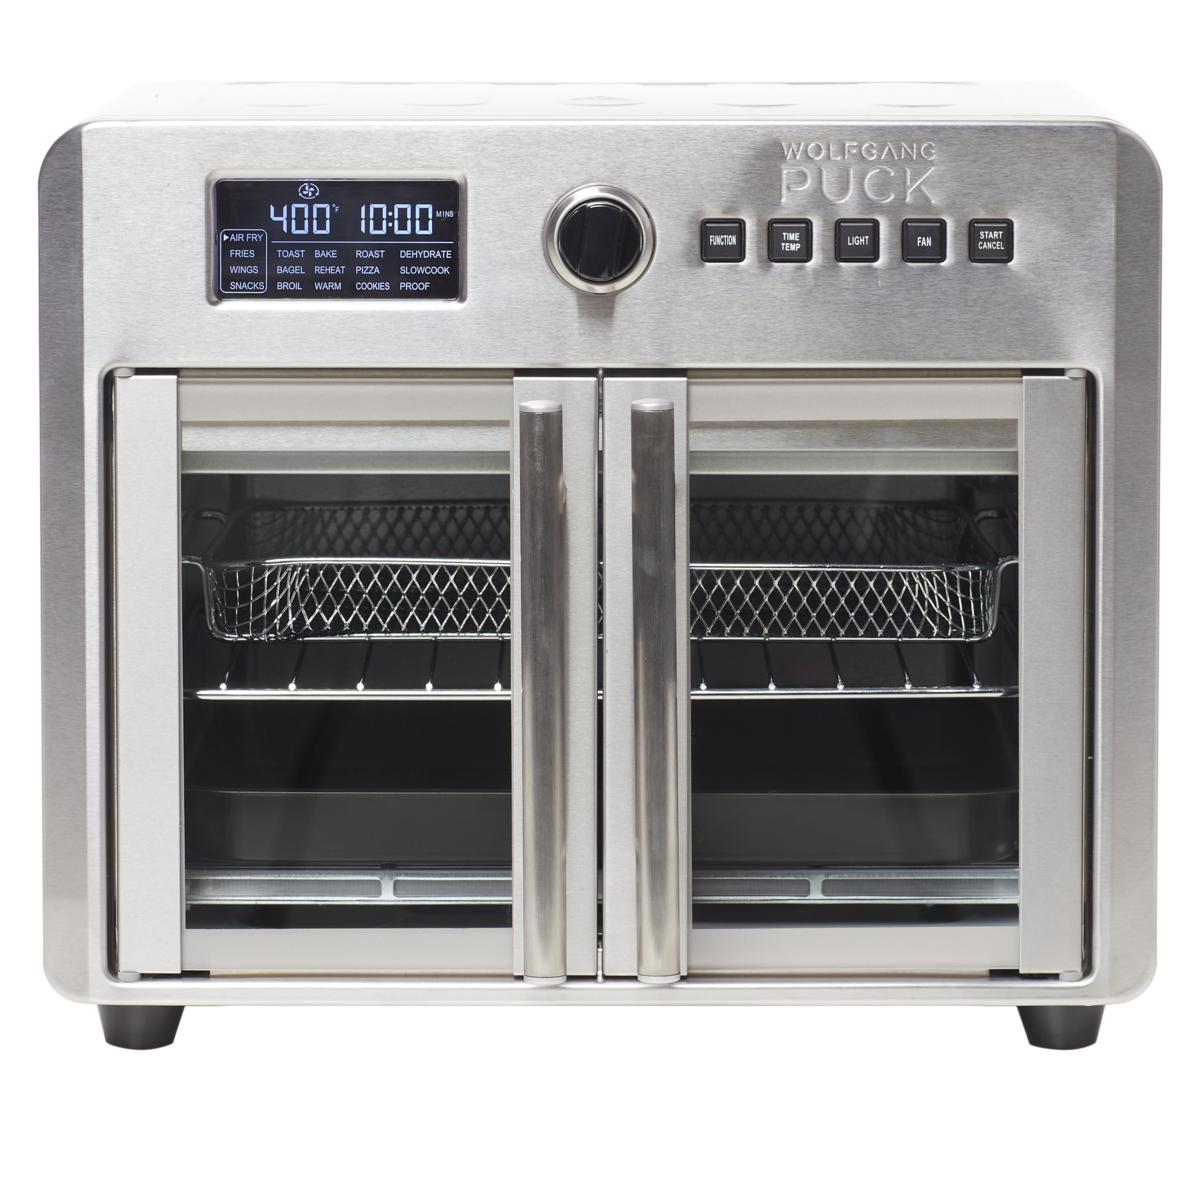 Wolfgang  Puck Wolfgang Puck 1800-Watt Air fryer Oven with 16 Functions & French Door Open Box